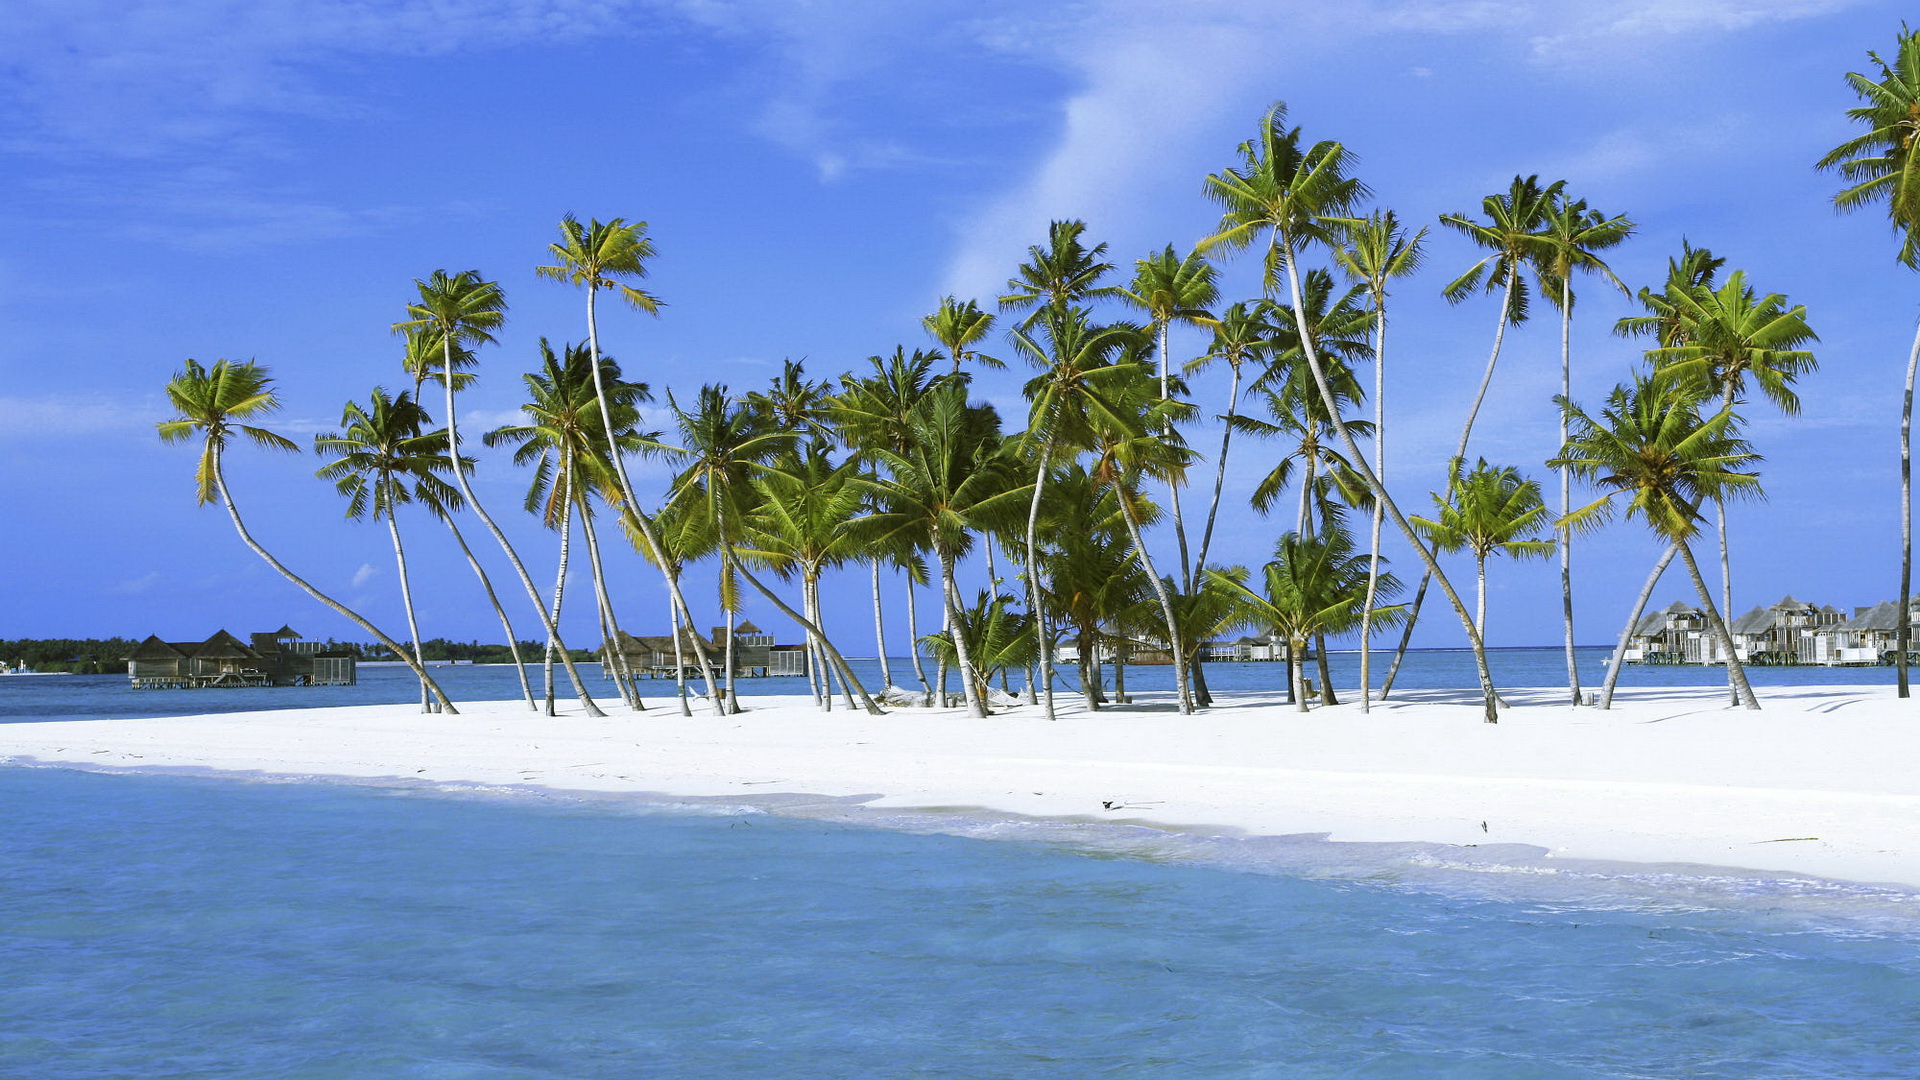 Beautiful Beach Sceneries - Green and Tall Coconut Trees by the Beach, the Sea is Blue and Clear, Looking Great 1920X1080 free wallpaper download